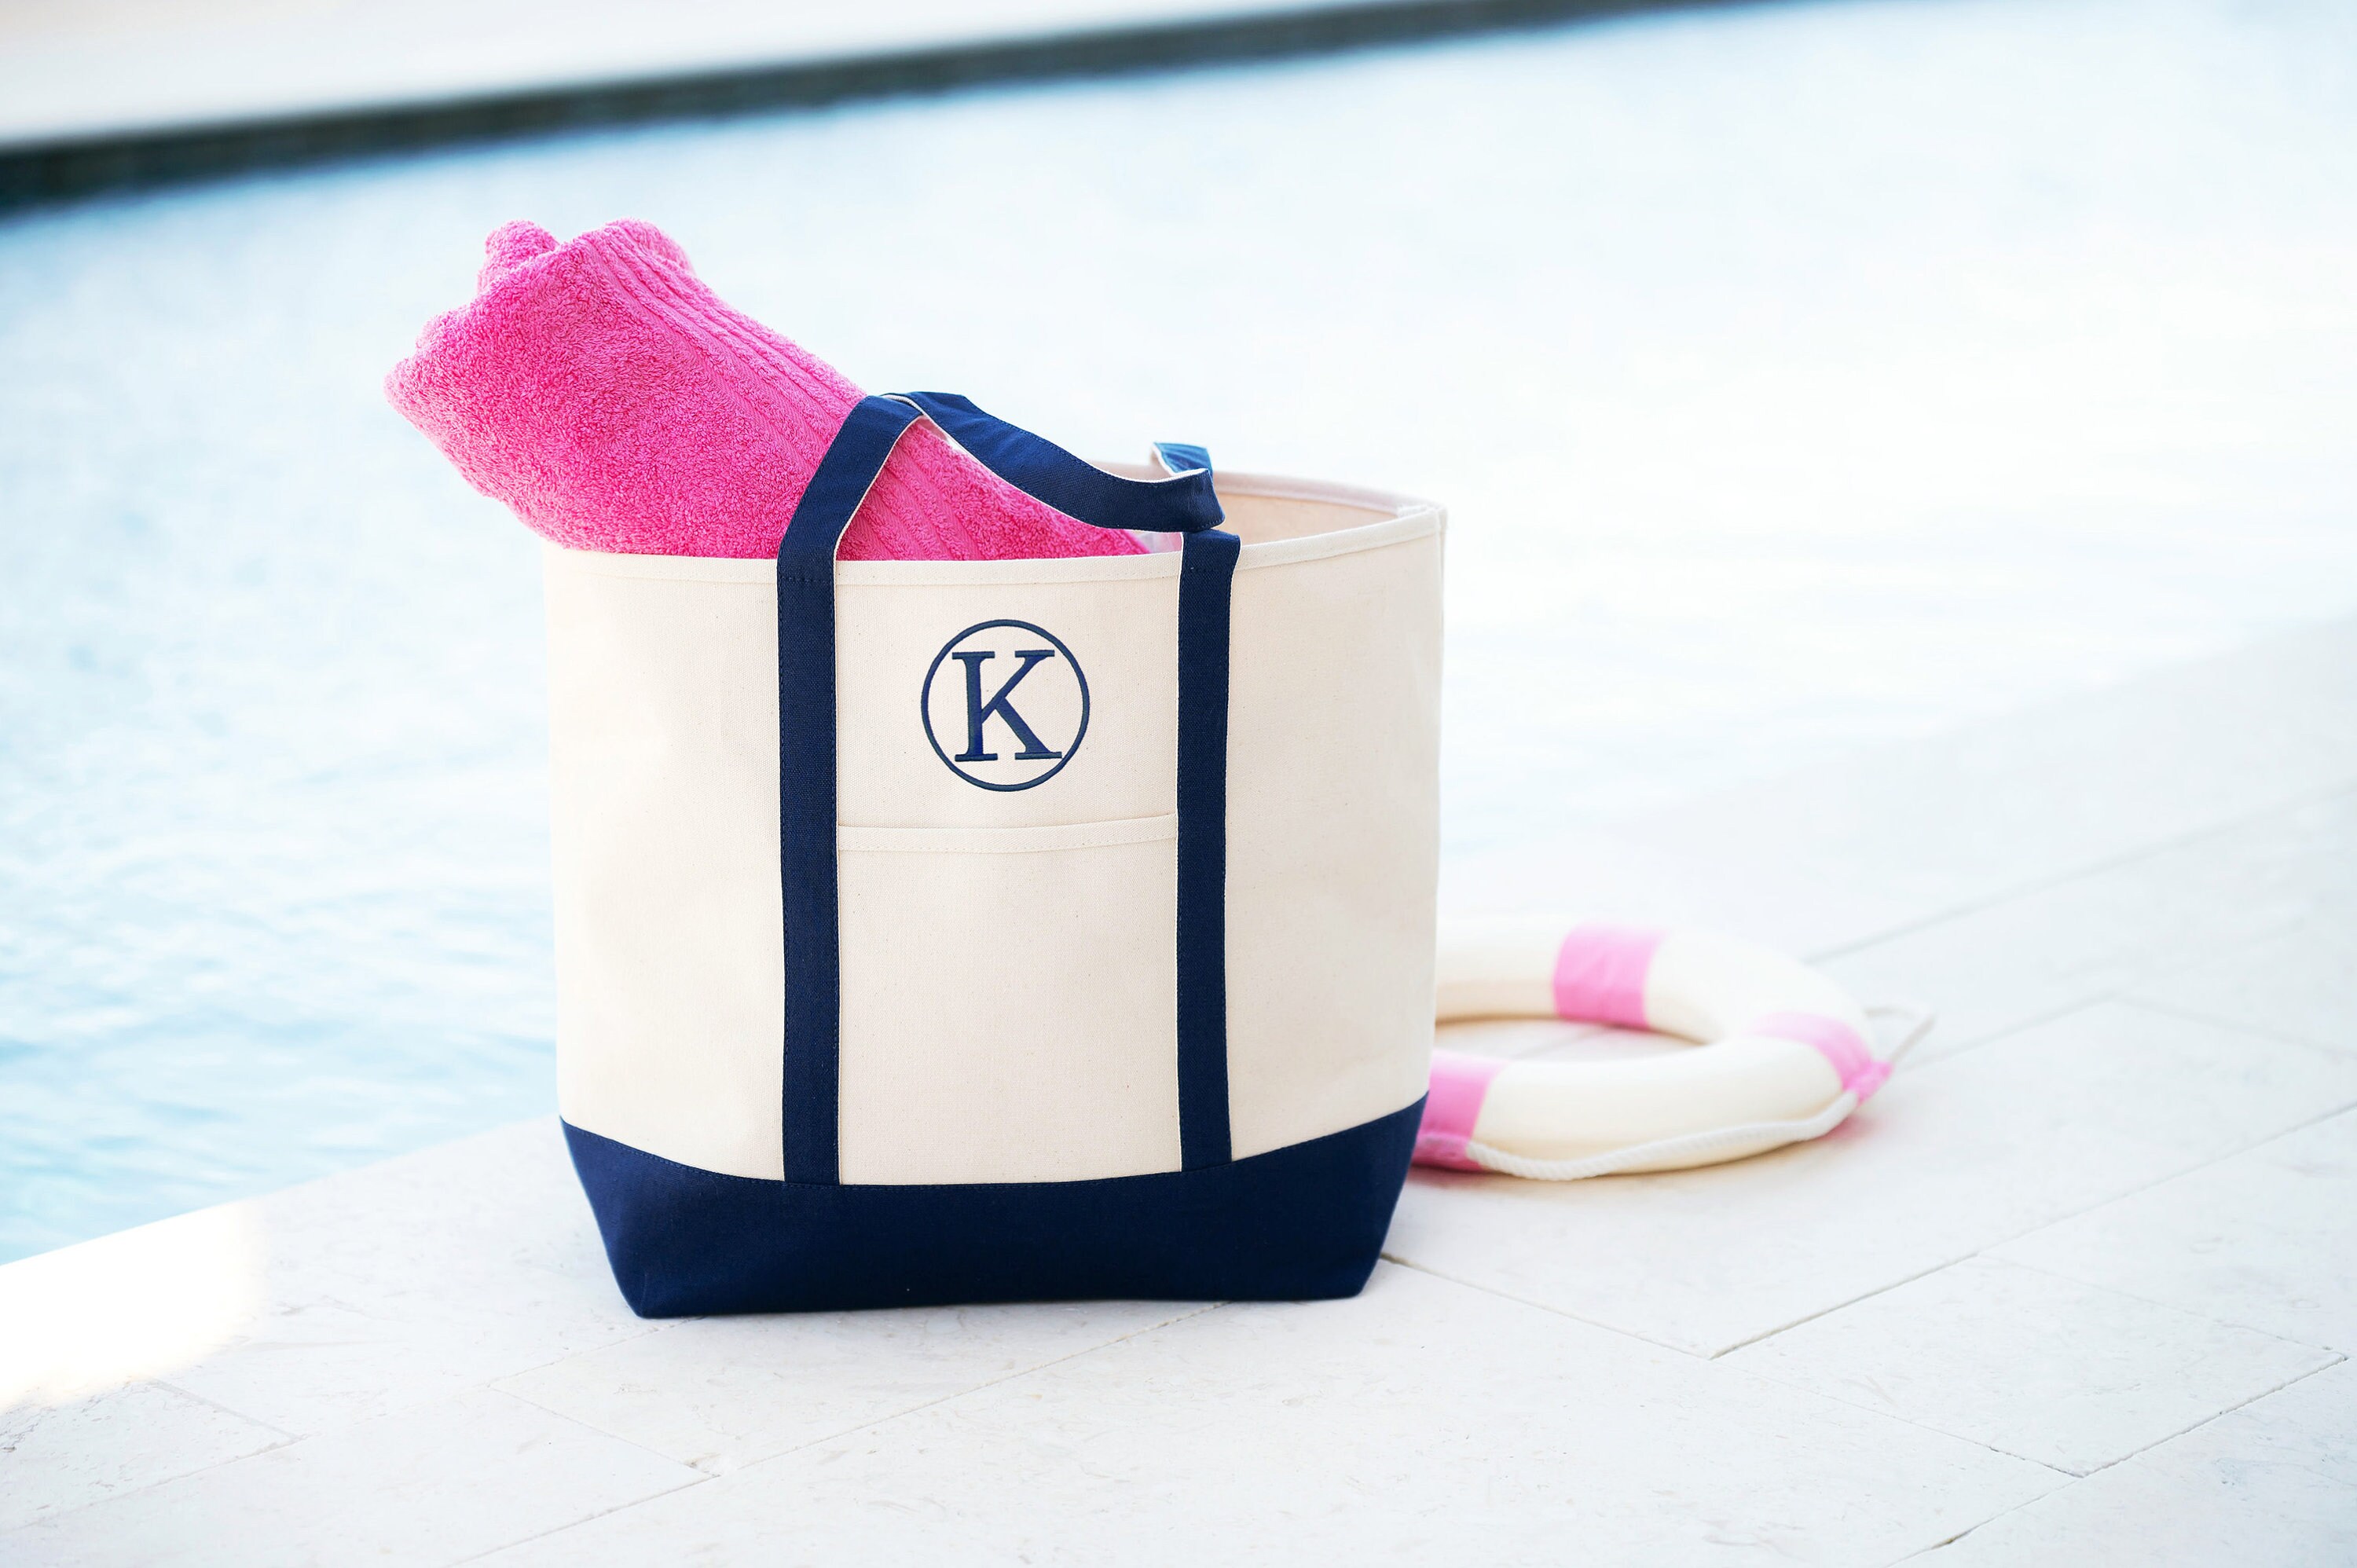 Monogrammed Canvas Cream off White Hot Pink Trim Everyday Tote